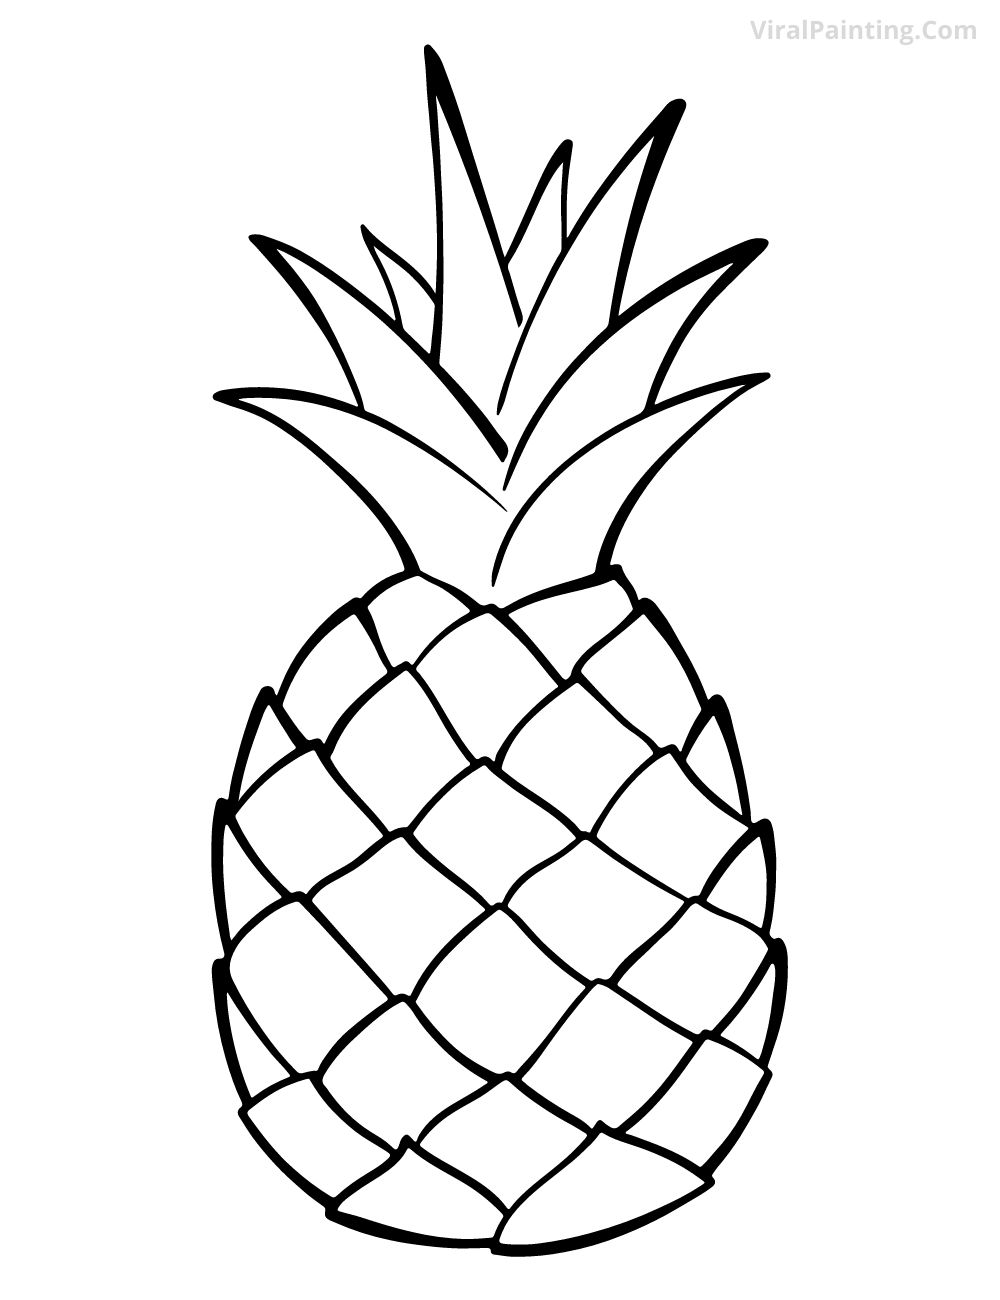 Simple and Easy pineapple drawing ideas for experts by viral painting.com (4)